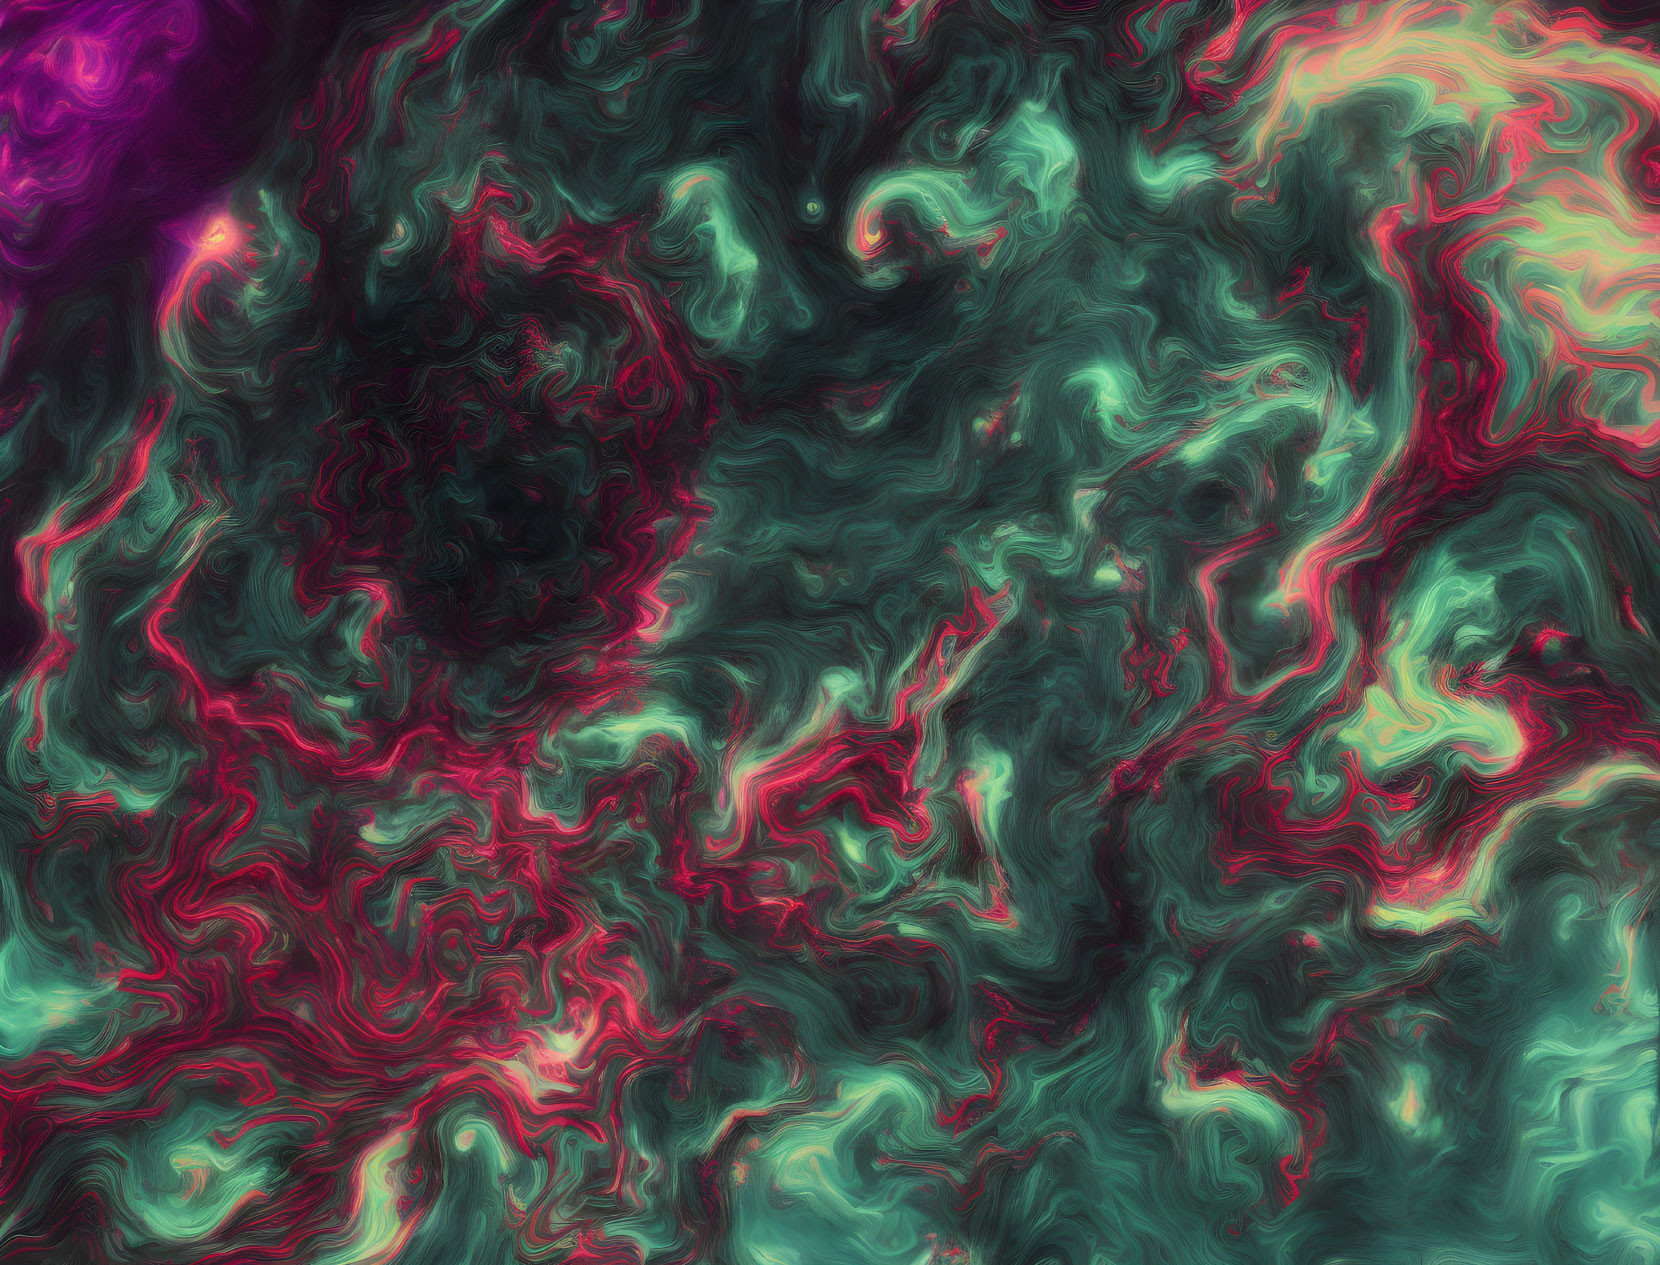 Vibrant Green and Pink Swirl Abstract Art in Psychedelic Style